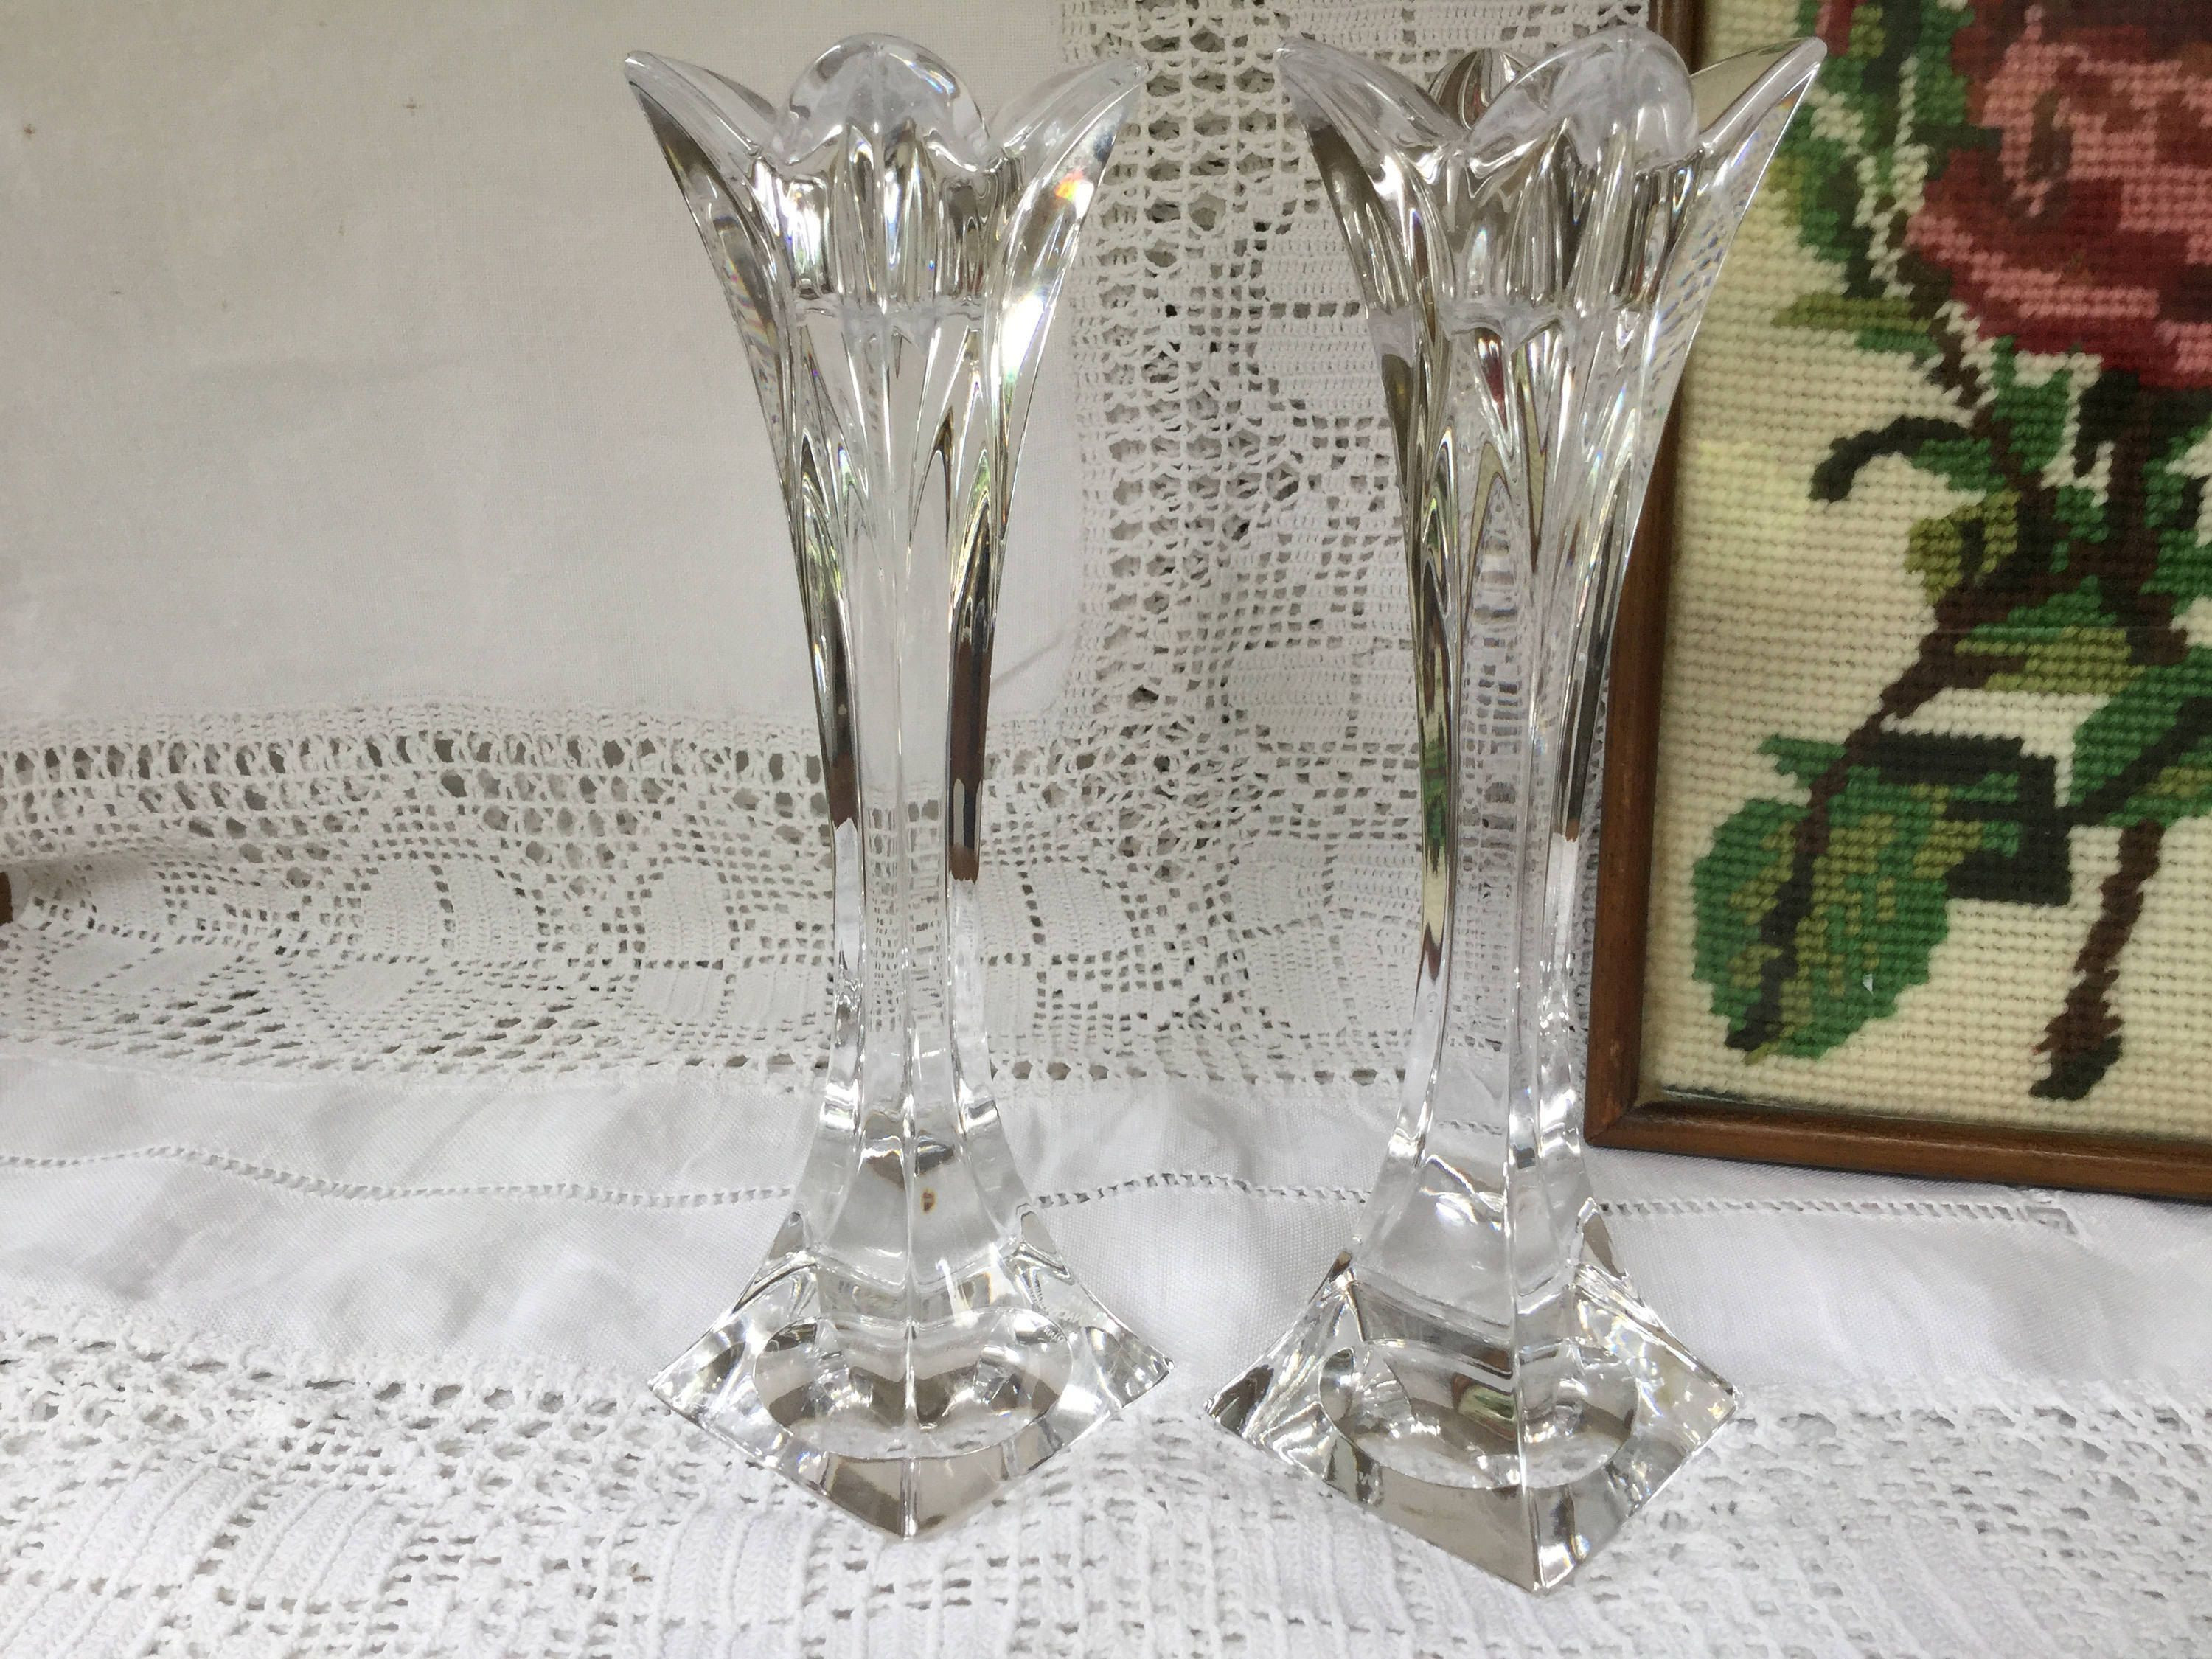 waterford crystal pineapple vase of 48 nachtmann crystal vase the weekly world pertaining to 48 nachtmann crystal vase